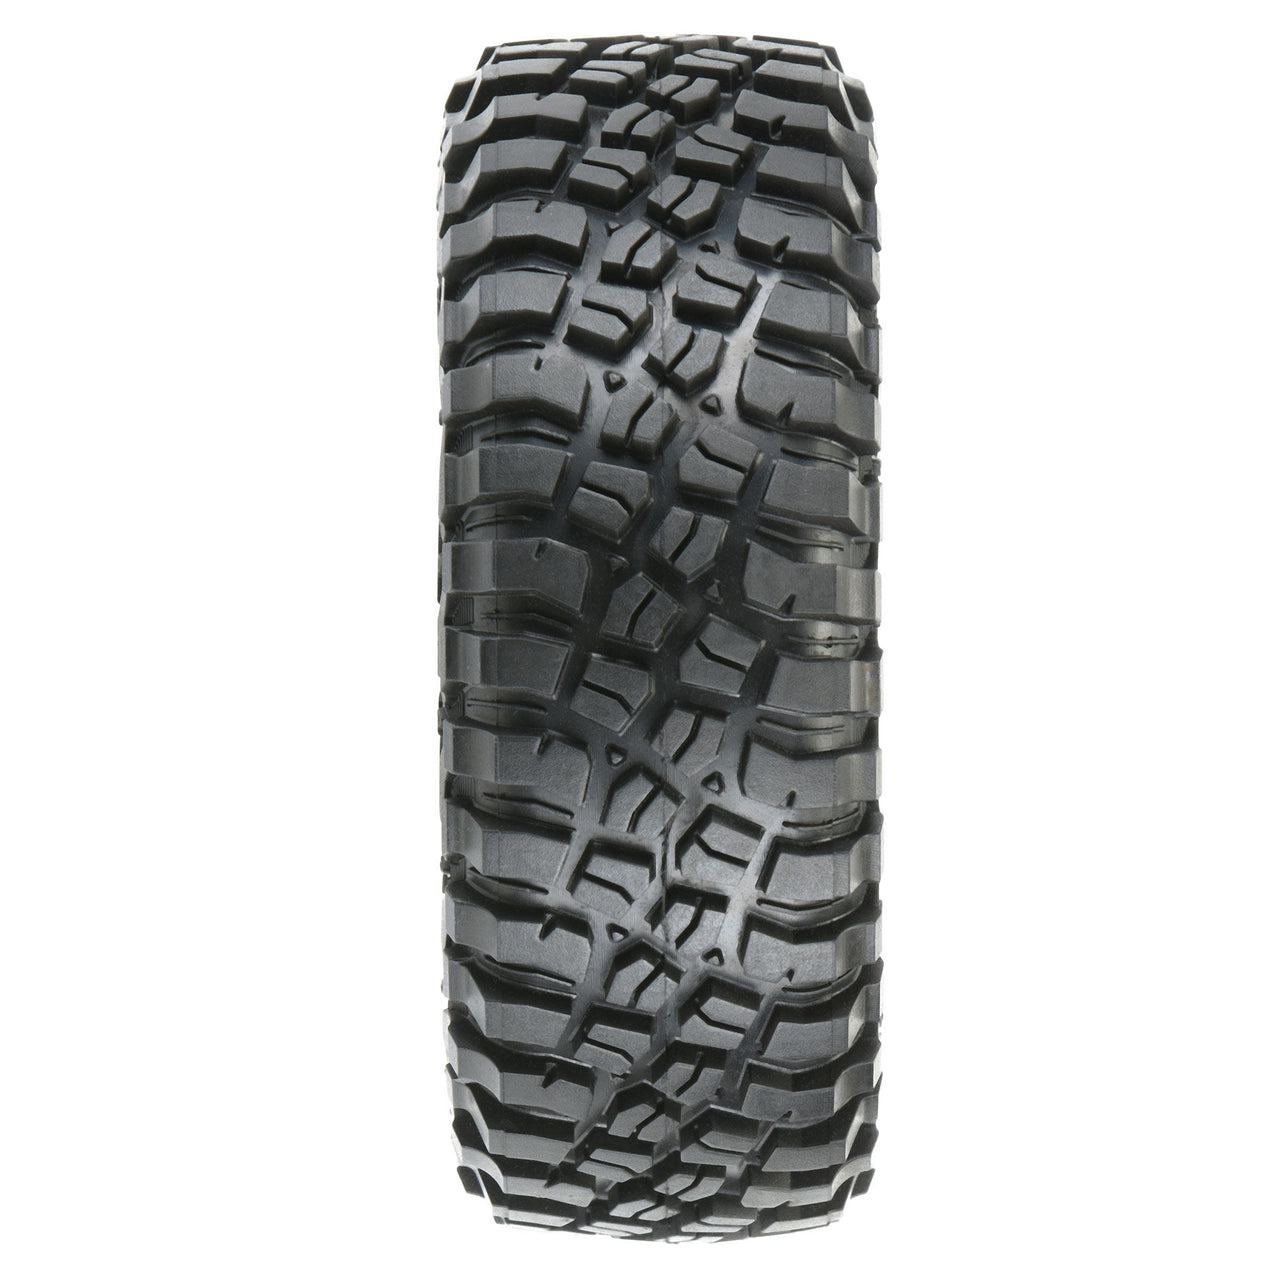 PRO1015214 1/10 Class 1 BFG T/A KM3 G8 Front/Rear 1.9" Rock Crawling Tires (2)